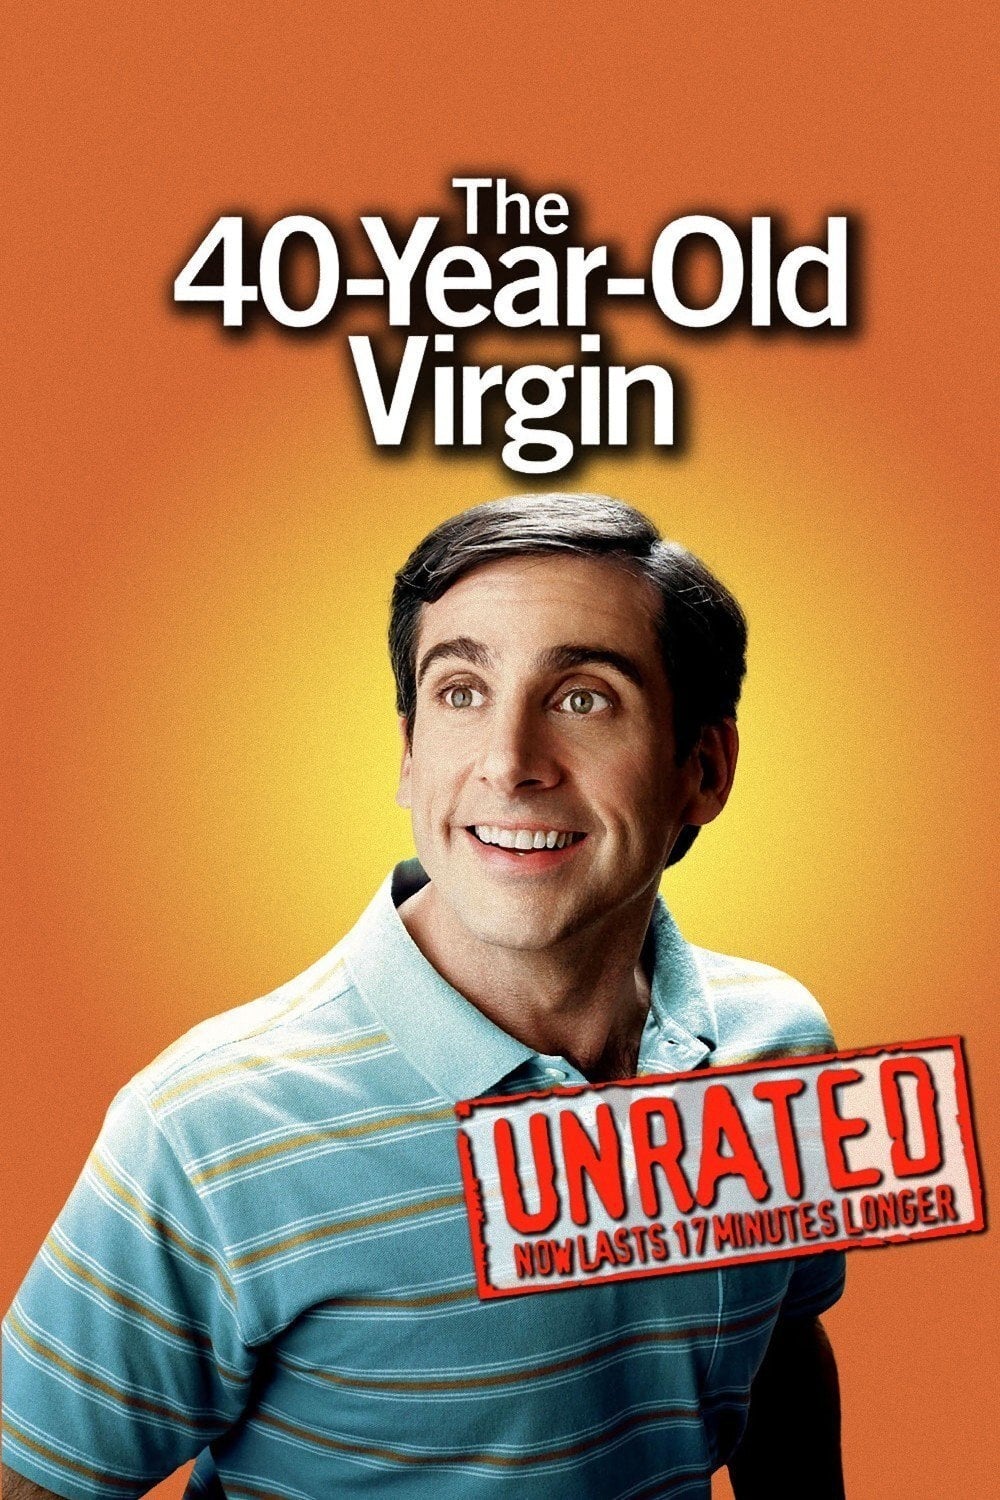 The 40 Year Old Virgin 2005 Watchrs Club 